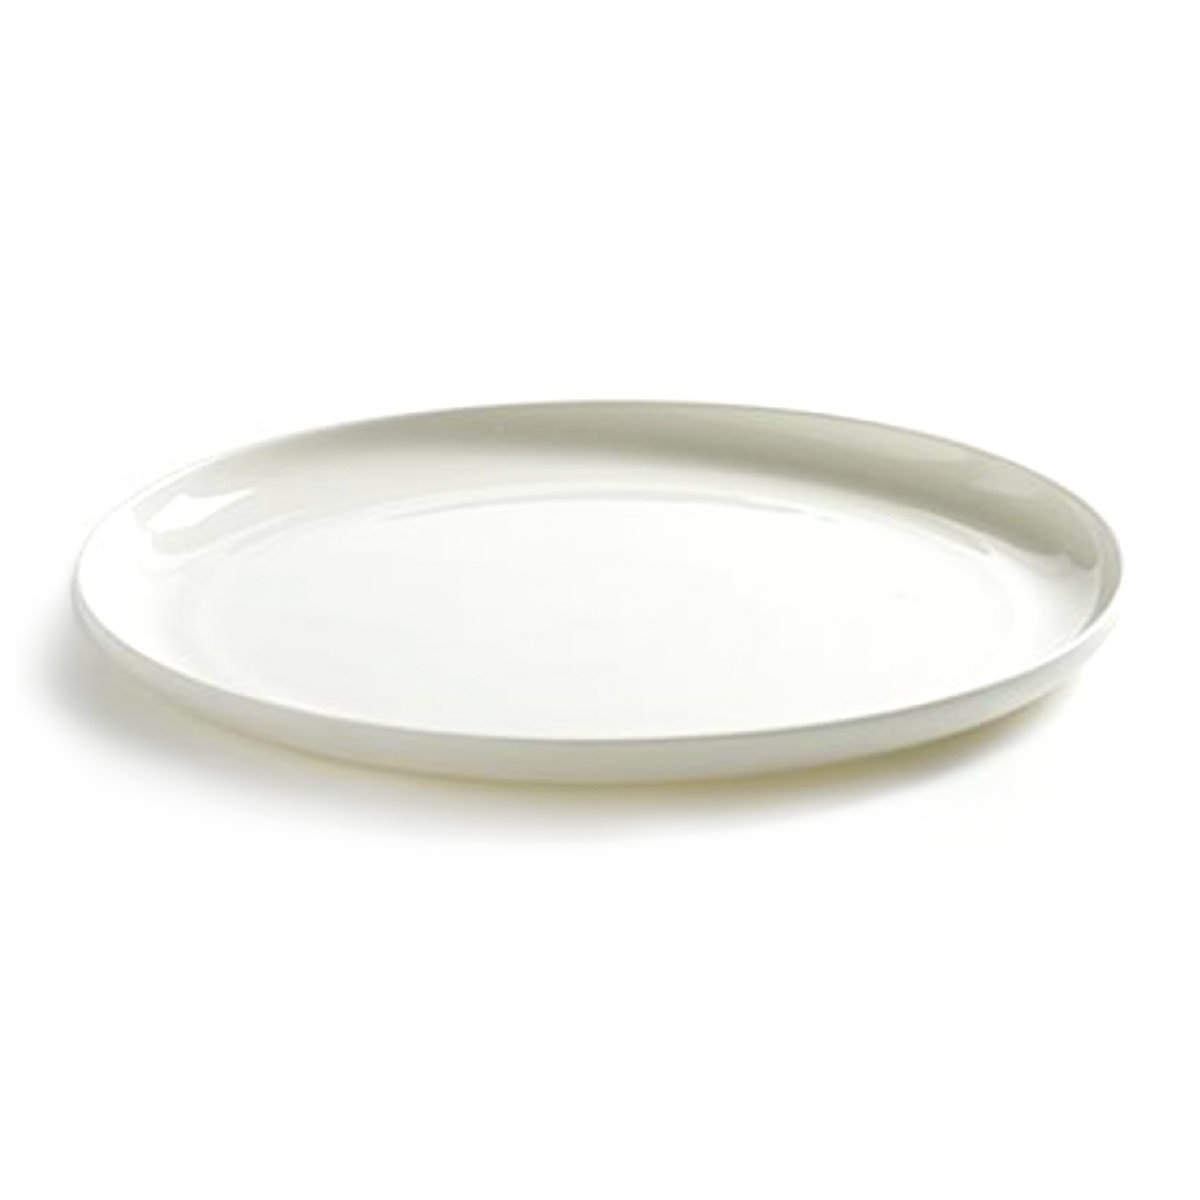 Piet Boon Low Plate, X-Large